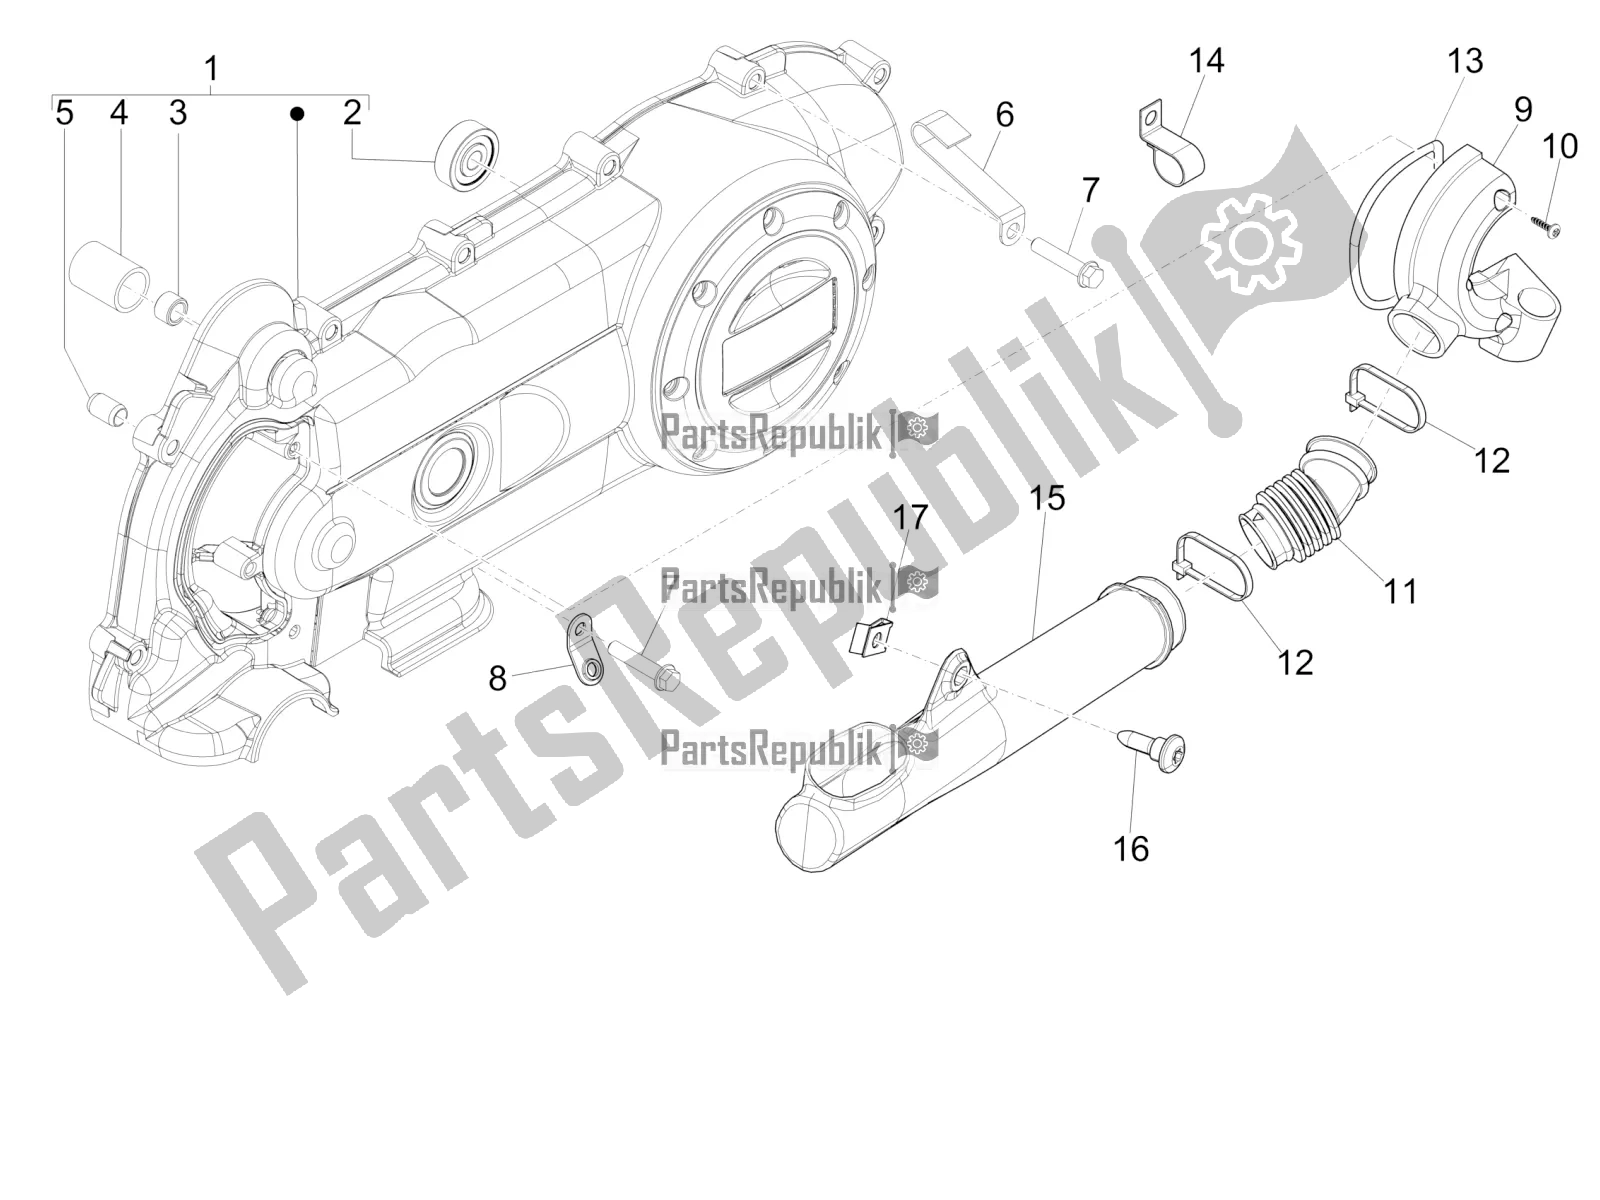 All parts for the Crankcase Cover - Crankcase Cooling of the Piaggio FLY 50 4T 4V 2018